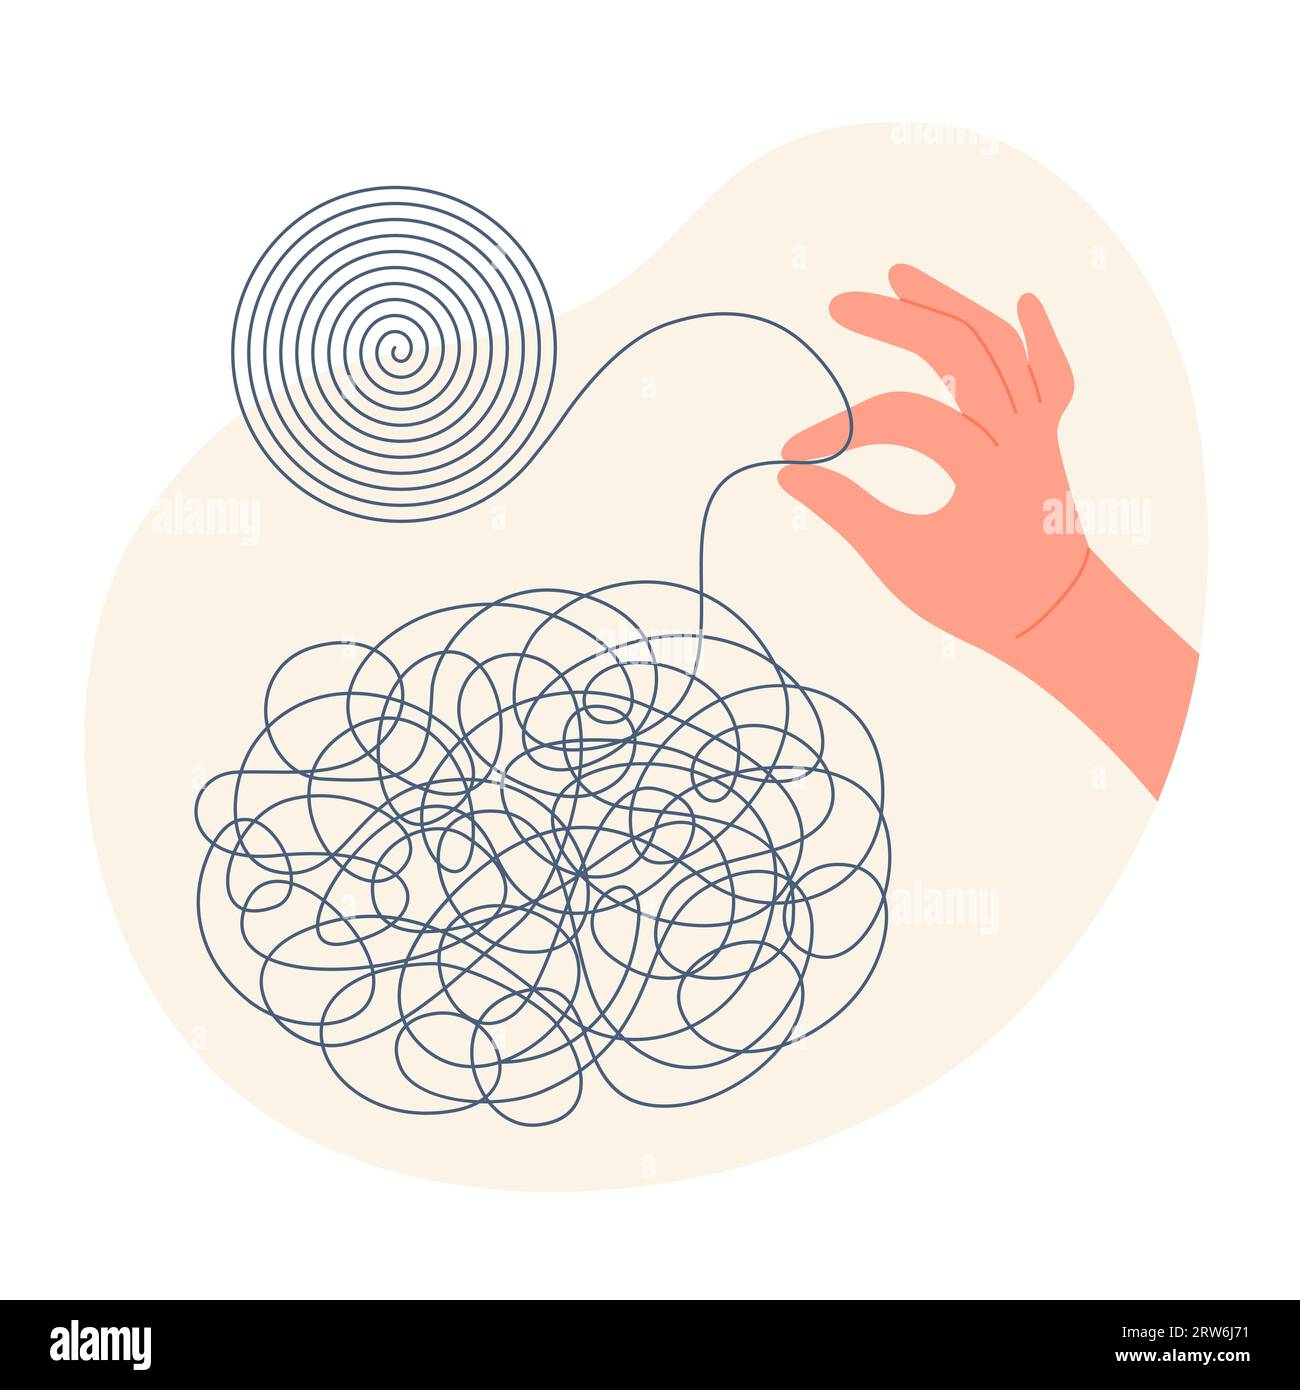 Chaos of mental problems, need for order and coachs help vector illustration. Cartoon hand holding tangled thread to untangle maze to circle with creative solution, psychotherapy session and training Stock Vector